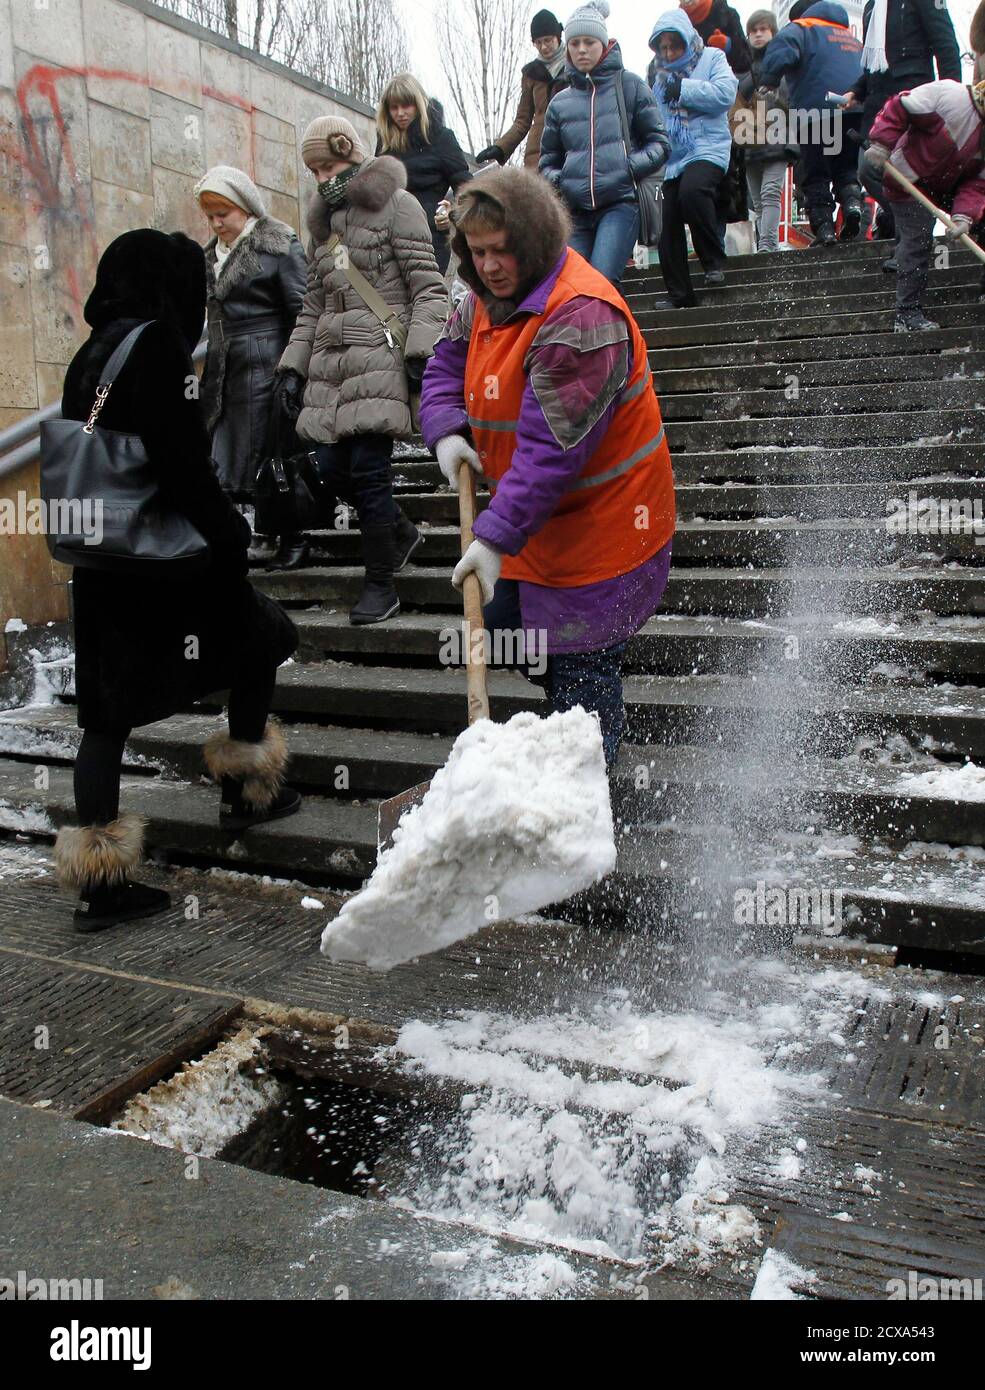 A woman removes snow from steps while people walk pass, as the air  temperature reaches about